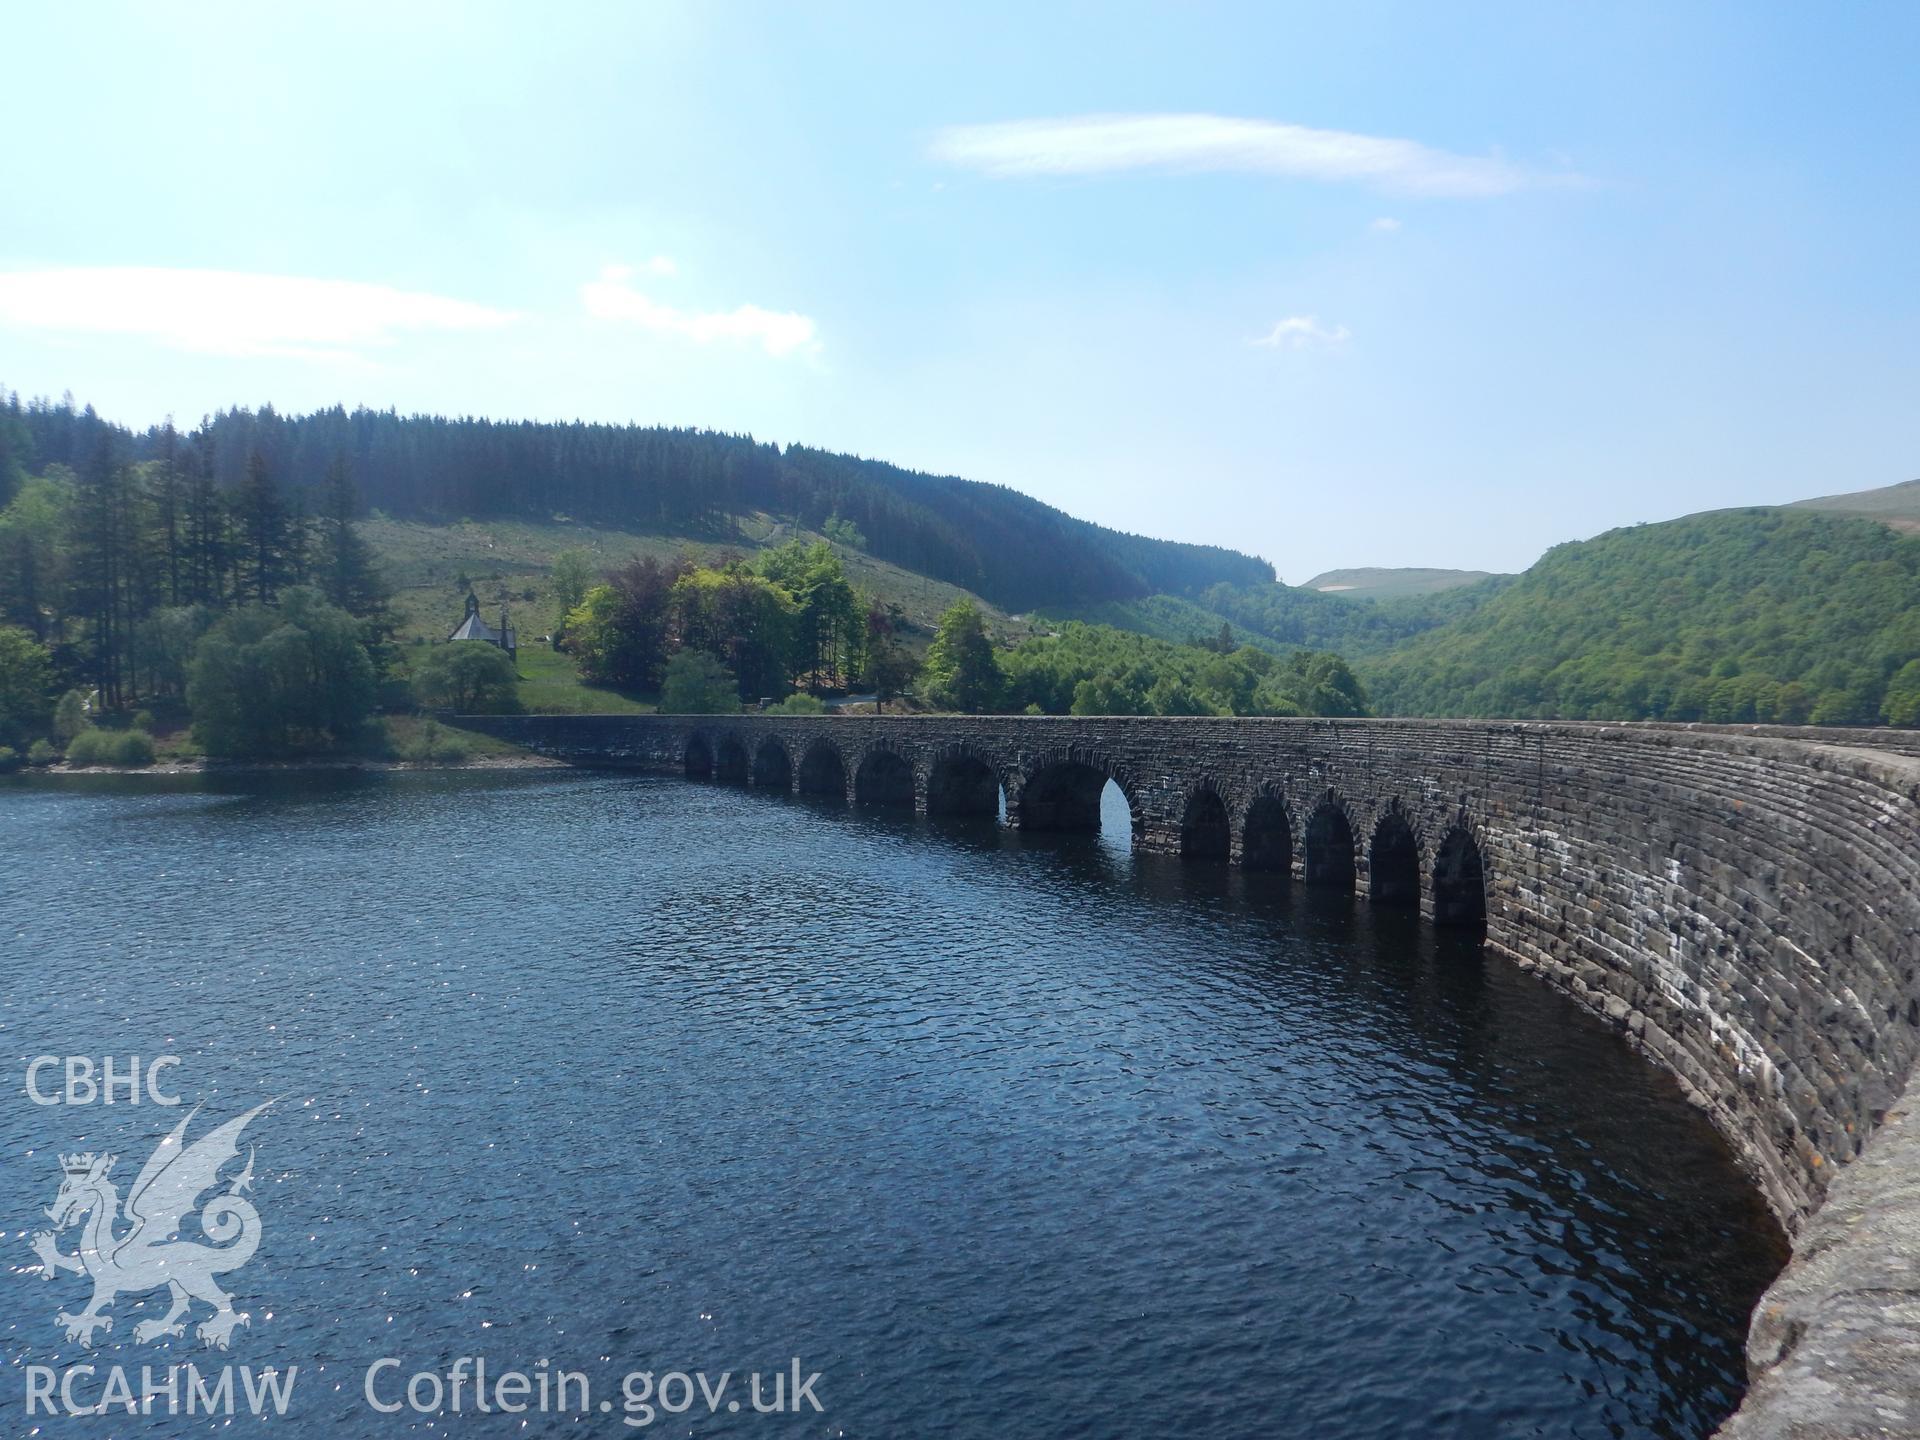 Carreg Ddu viaduct, looking west. Photographed as part of Archaeological Desk Based Assessment of Afon Claerwen, Elan Valley, Rhayader, Powys. Assessment conducted by Archaeology Wales in 2018. Report no. 1681. Project no. 2573.